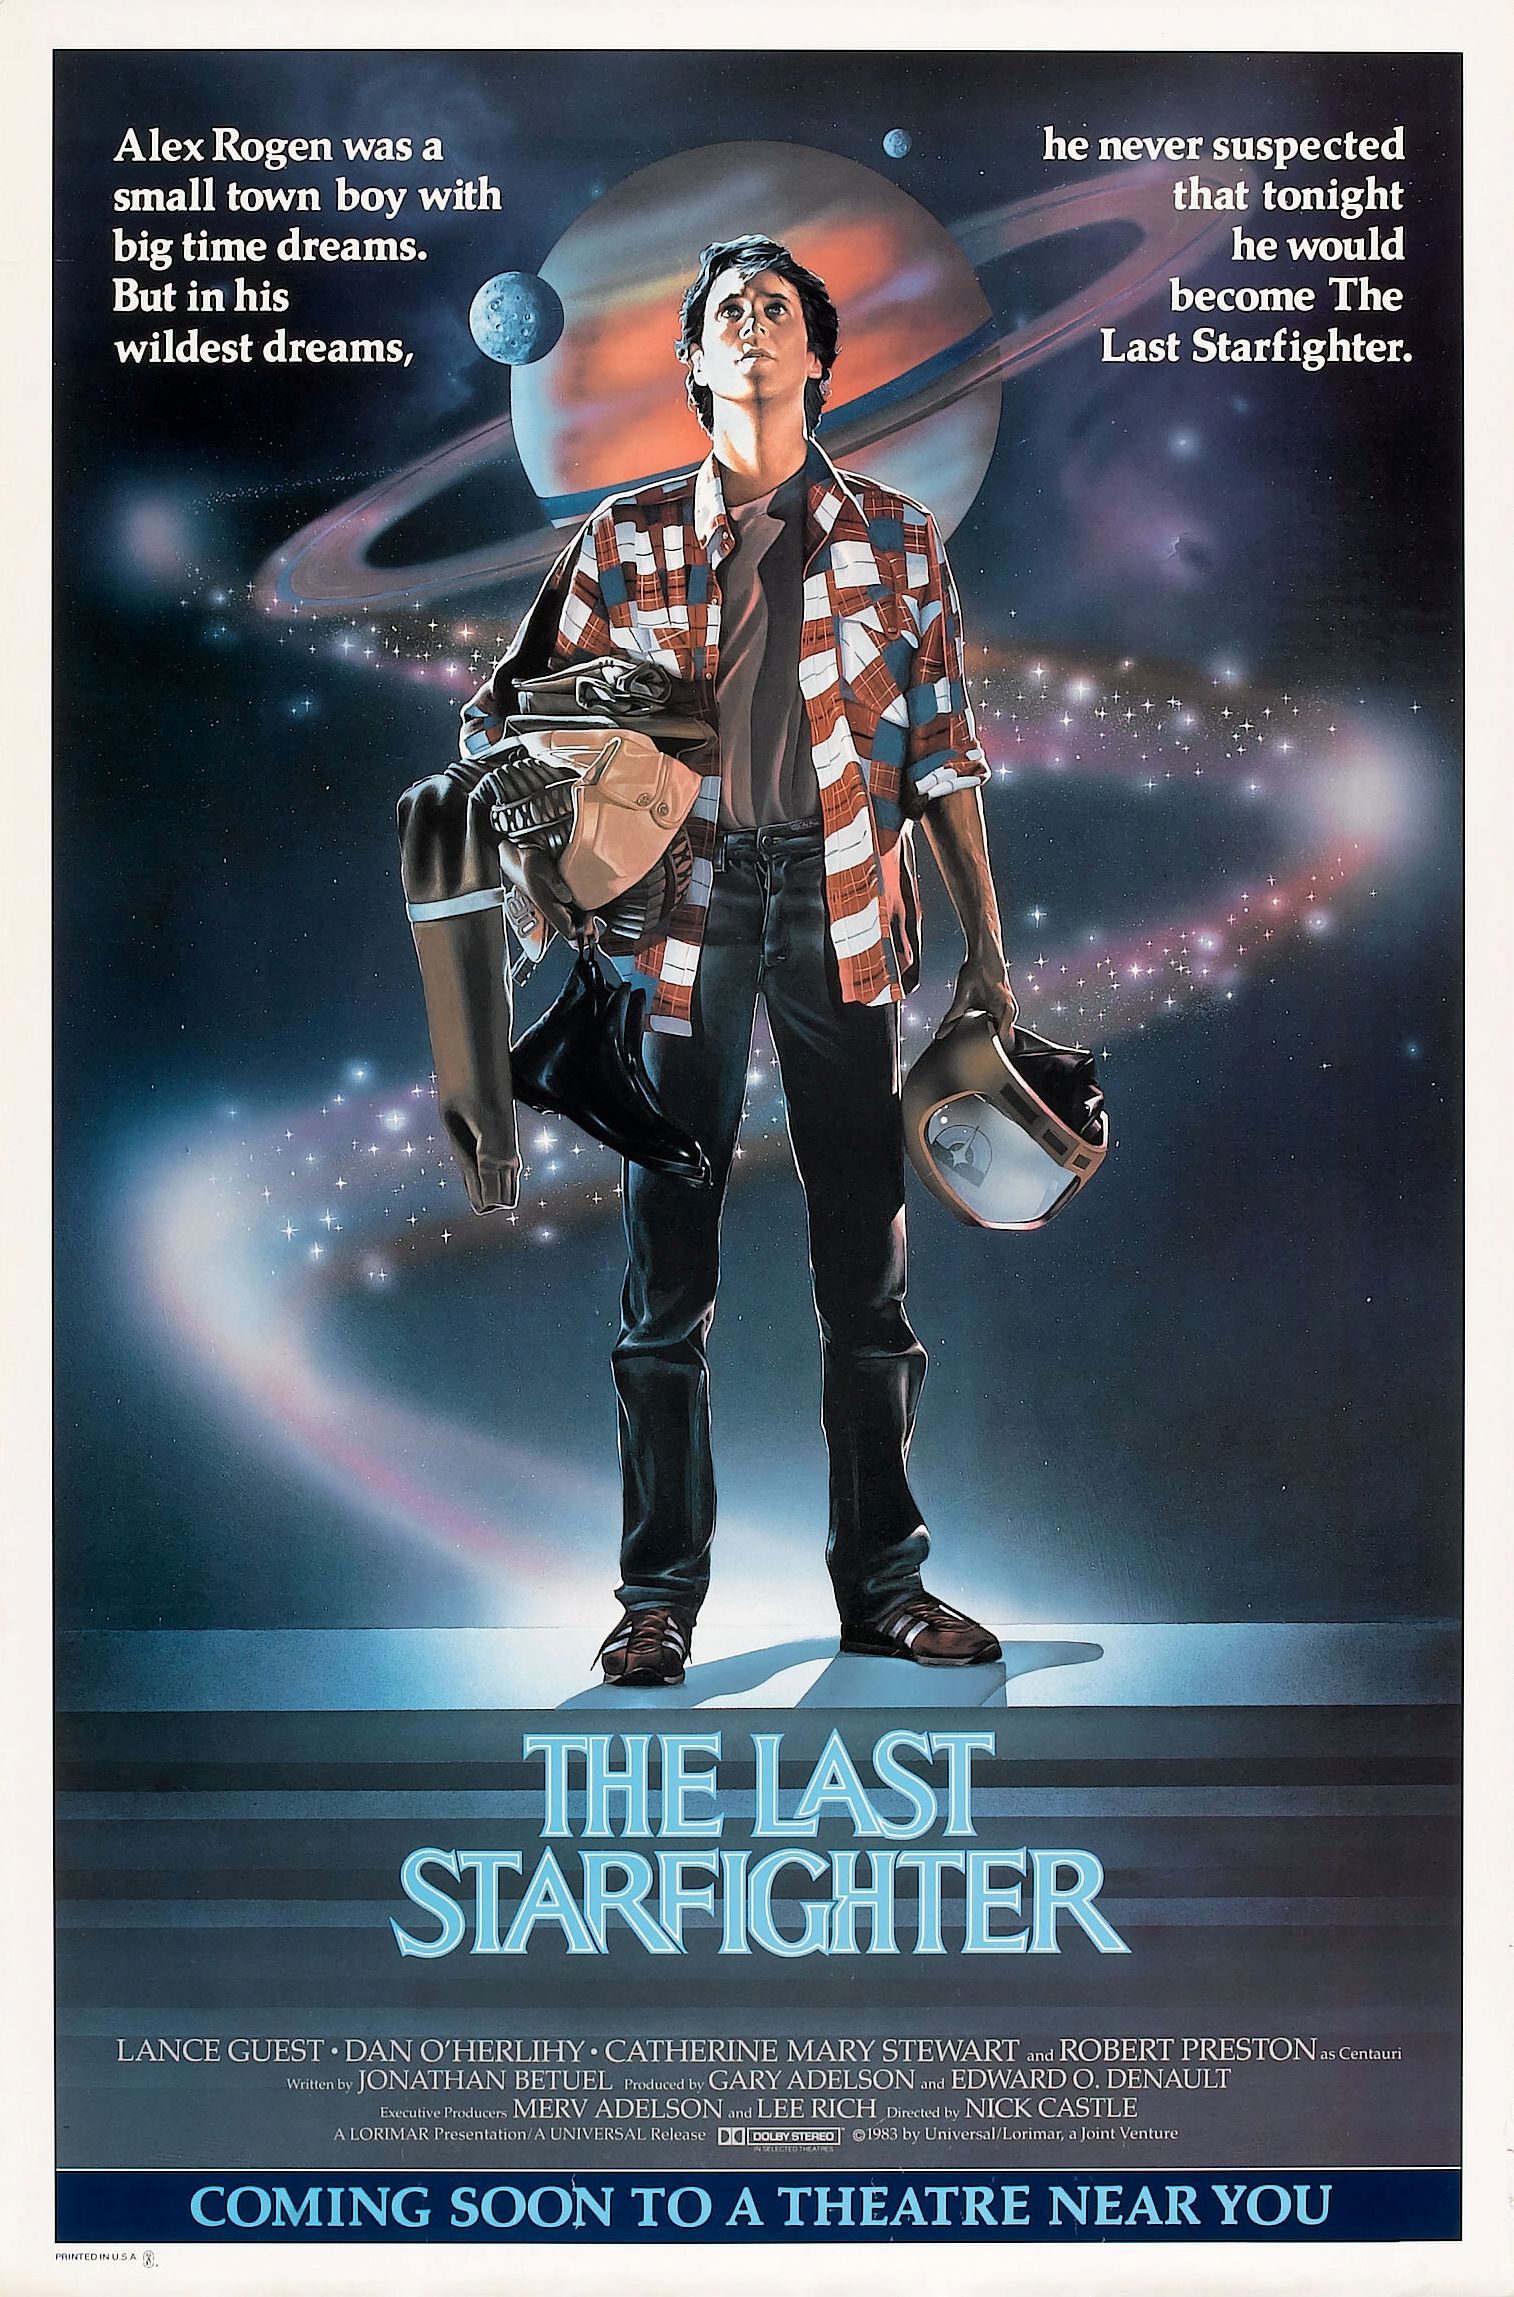 The Last Starfighter Pics, Video Game Collection